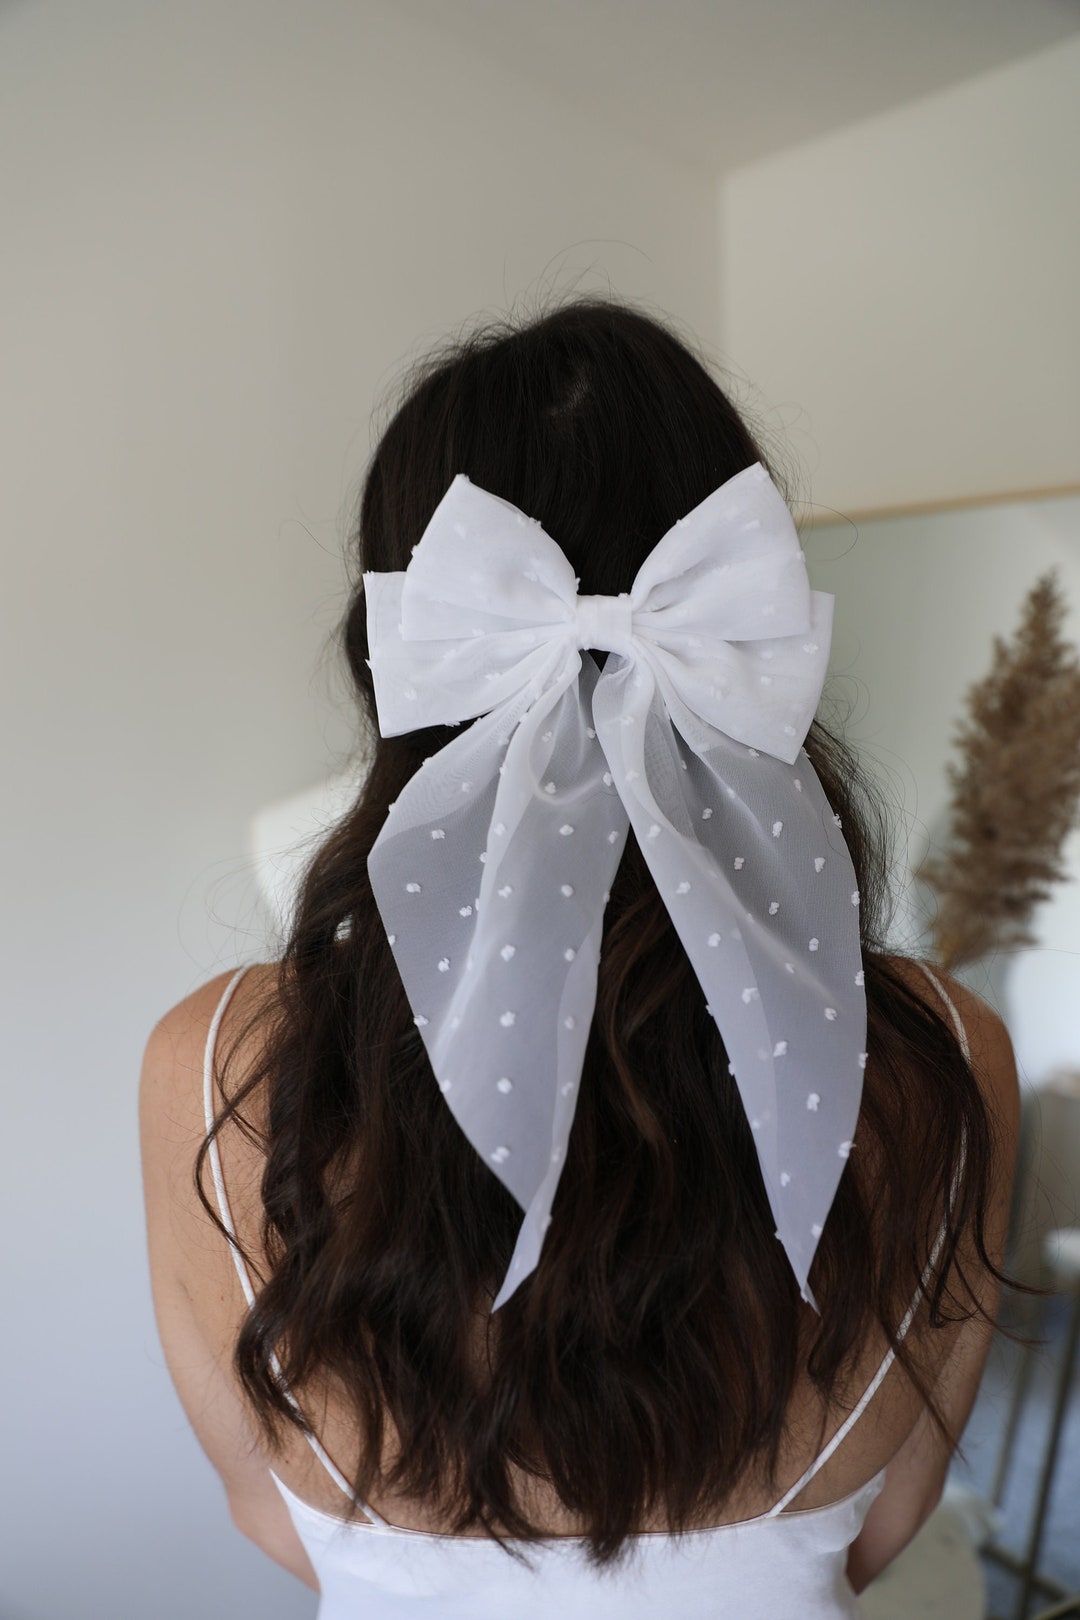 Bridal hair bow from dotted tulle - DARLA